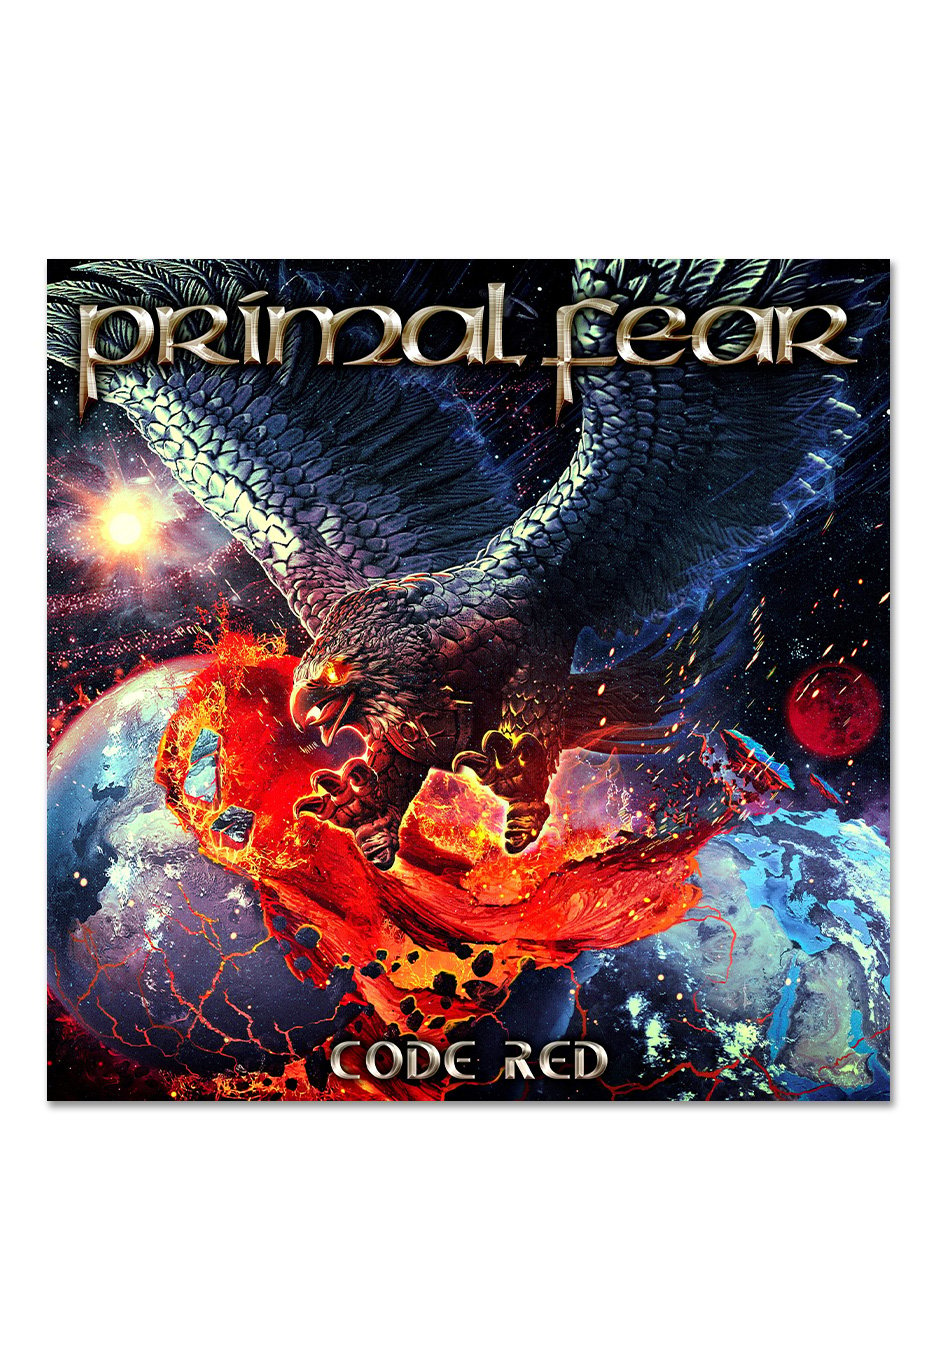 Primal Fear - Code Red Blue - Colored 2 Vinyl